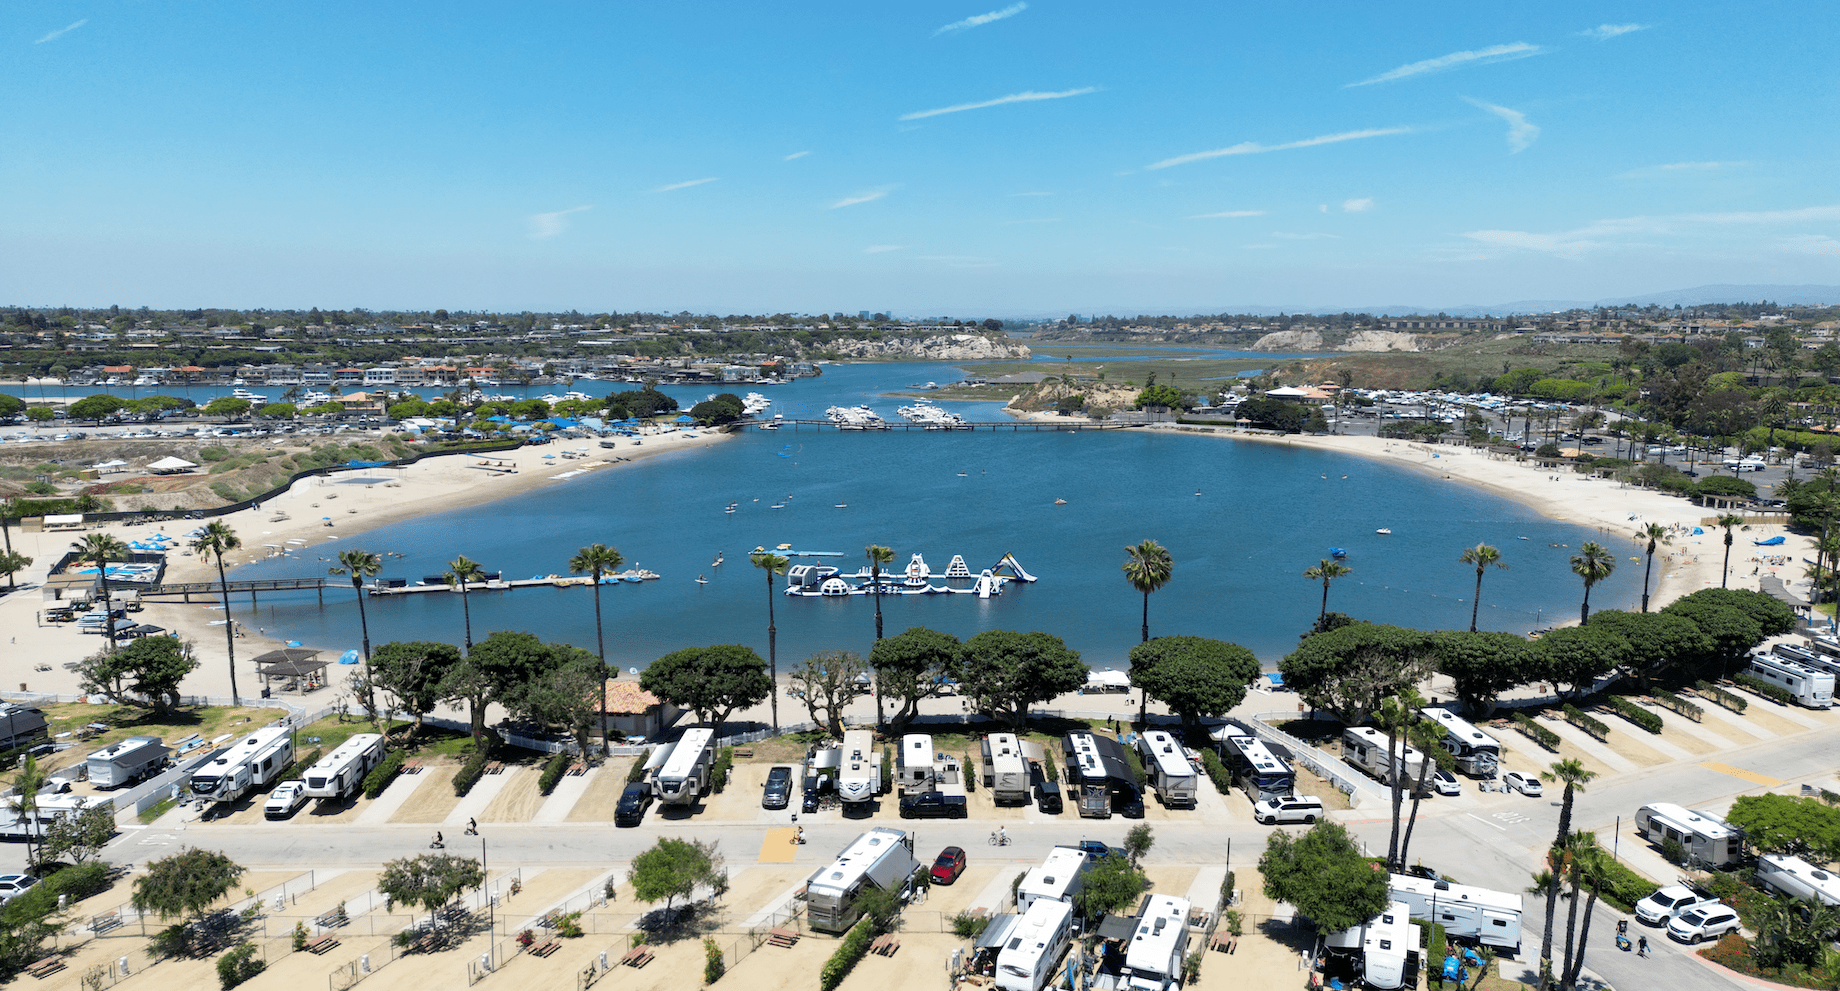 Newport Dunes - One Of The Five Most Luxurious Rv Resorts In The U.S.A.